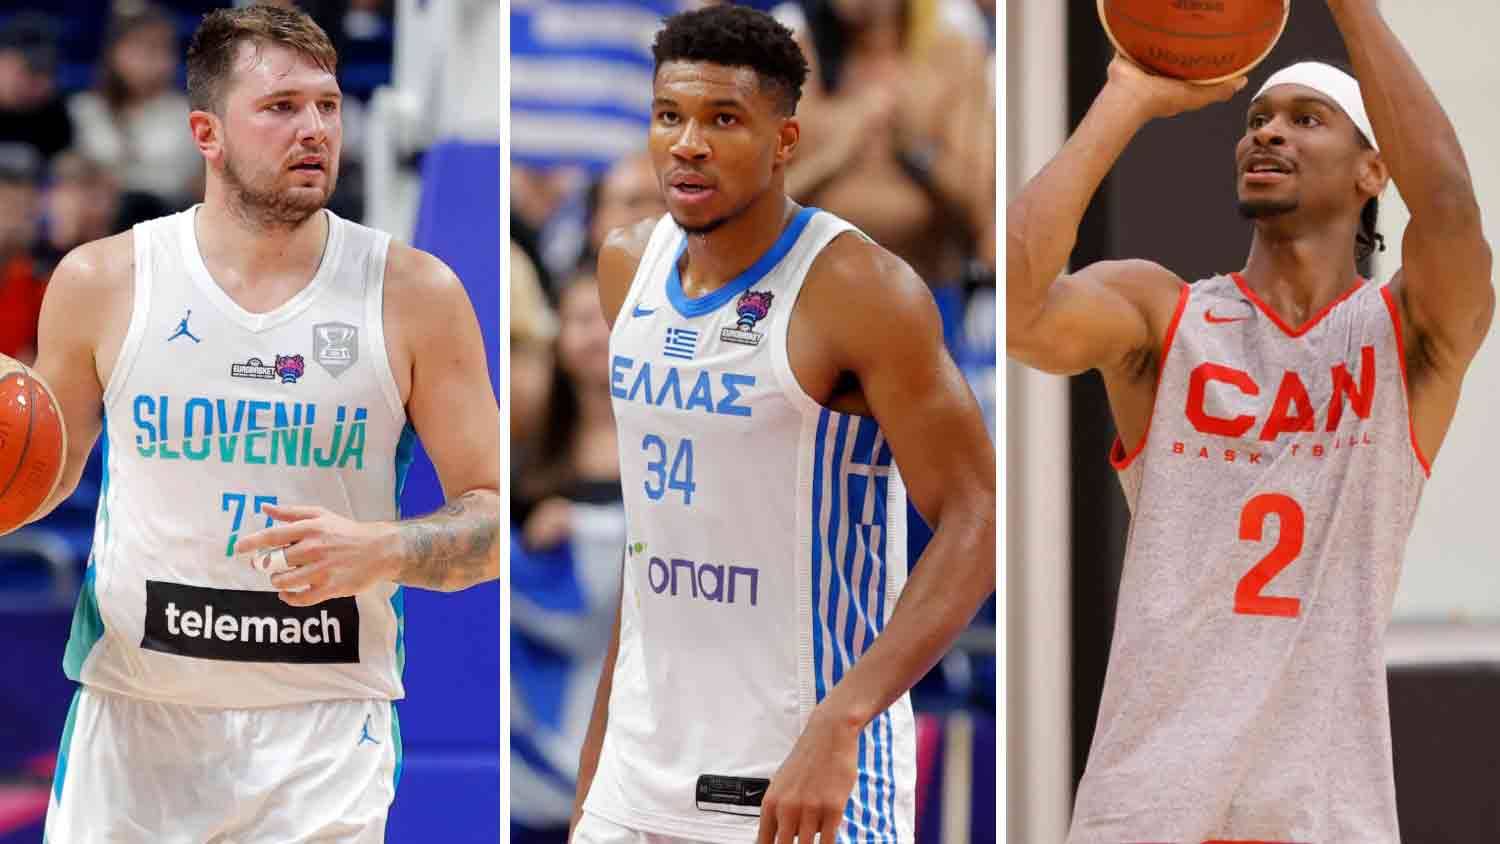 2023 FIBA World Cup: Best NBA players participating, ranked from 30-1